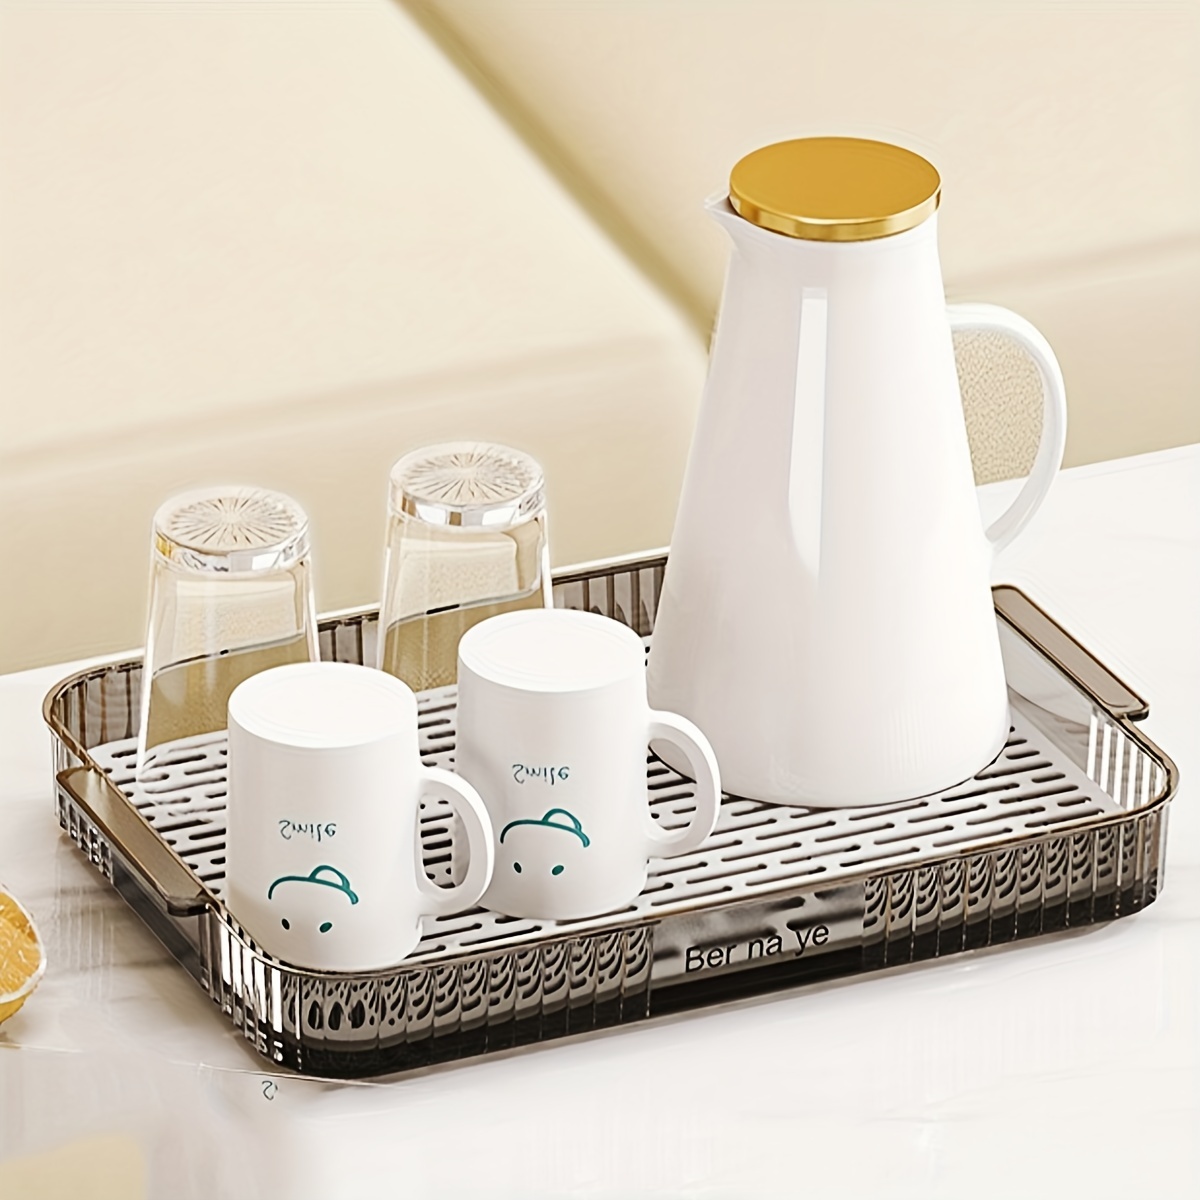 Dish Drainer by Hay